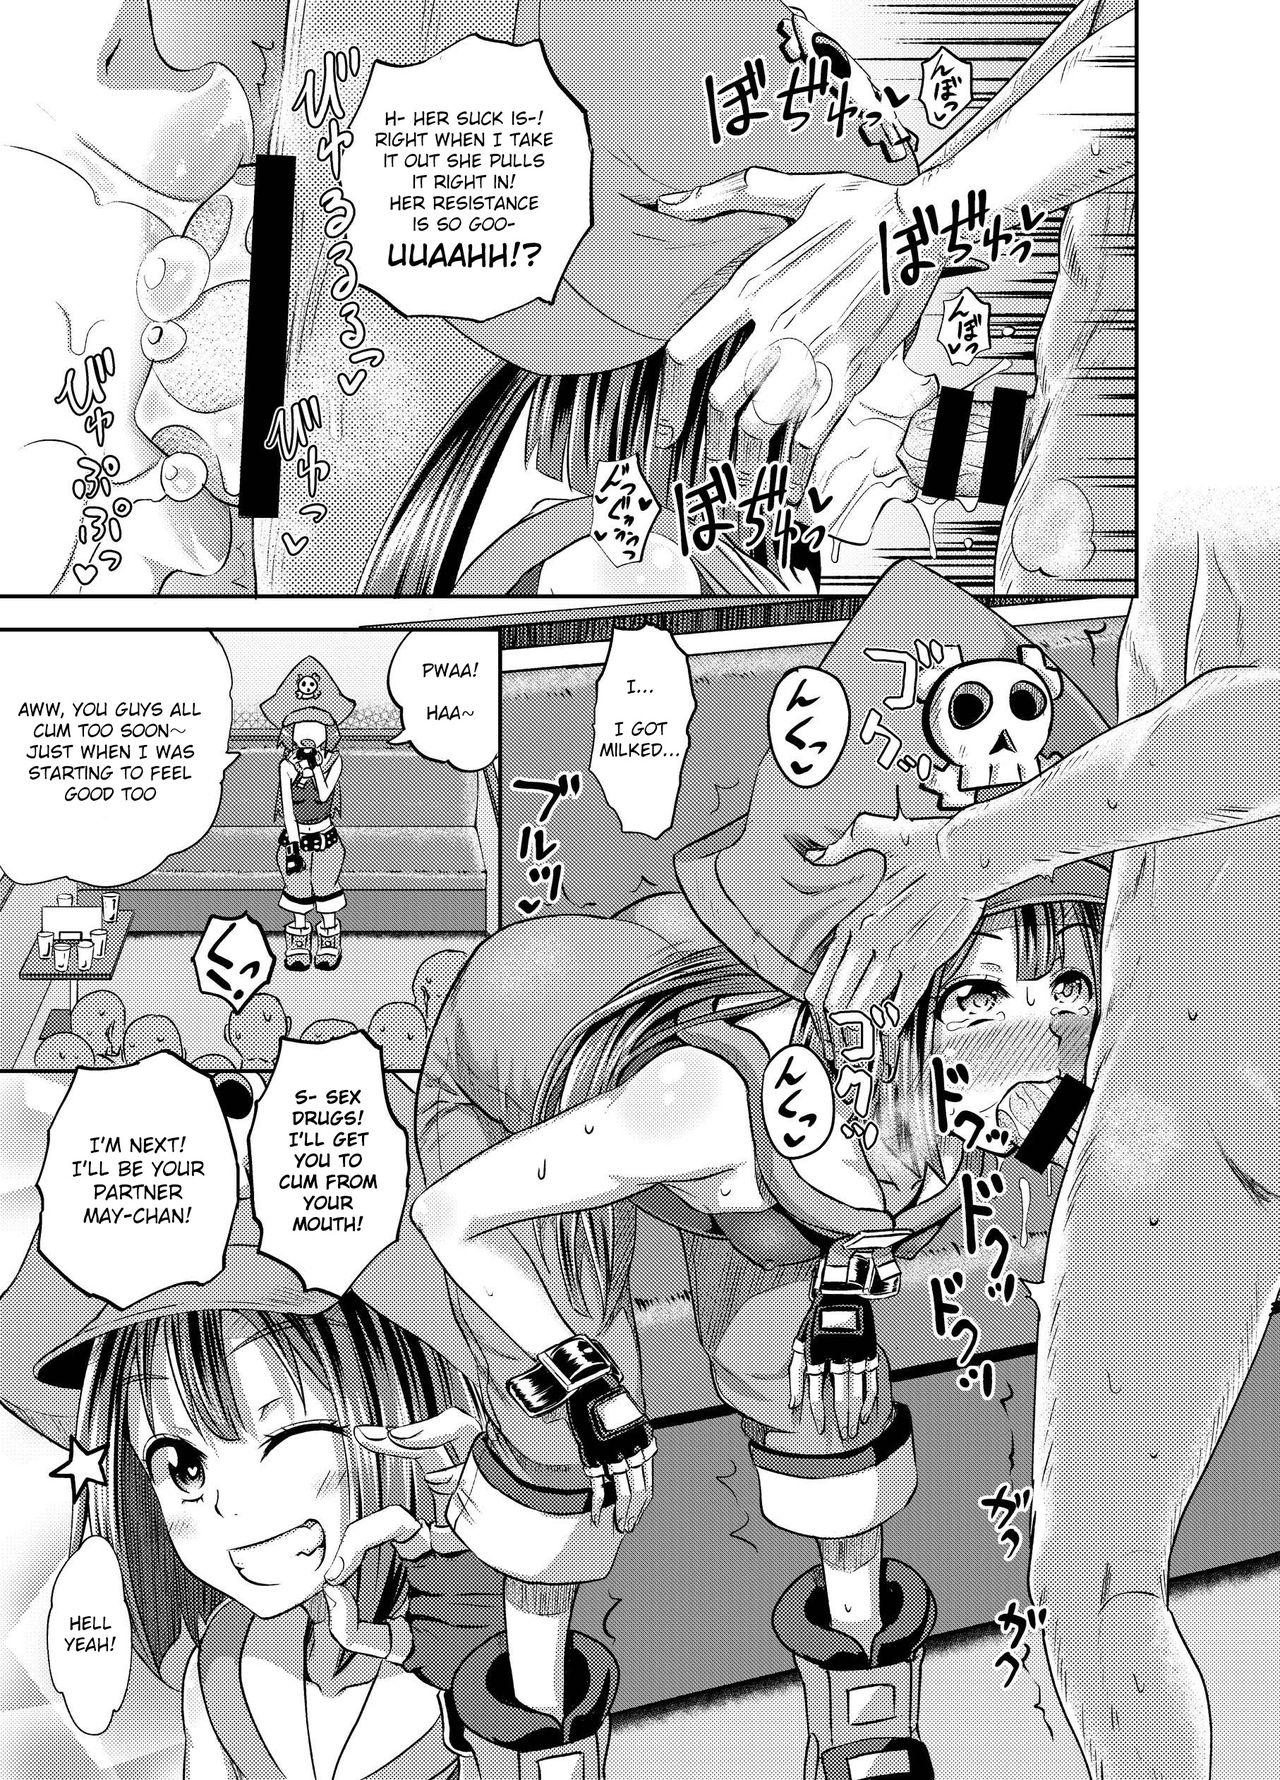 Analplay Jellyfish Kaizokudan e Youkoso! | Welcome to The Jellyfish Pleasure Club! - Guilty gear Livecams - Page 10